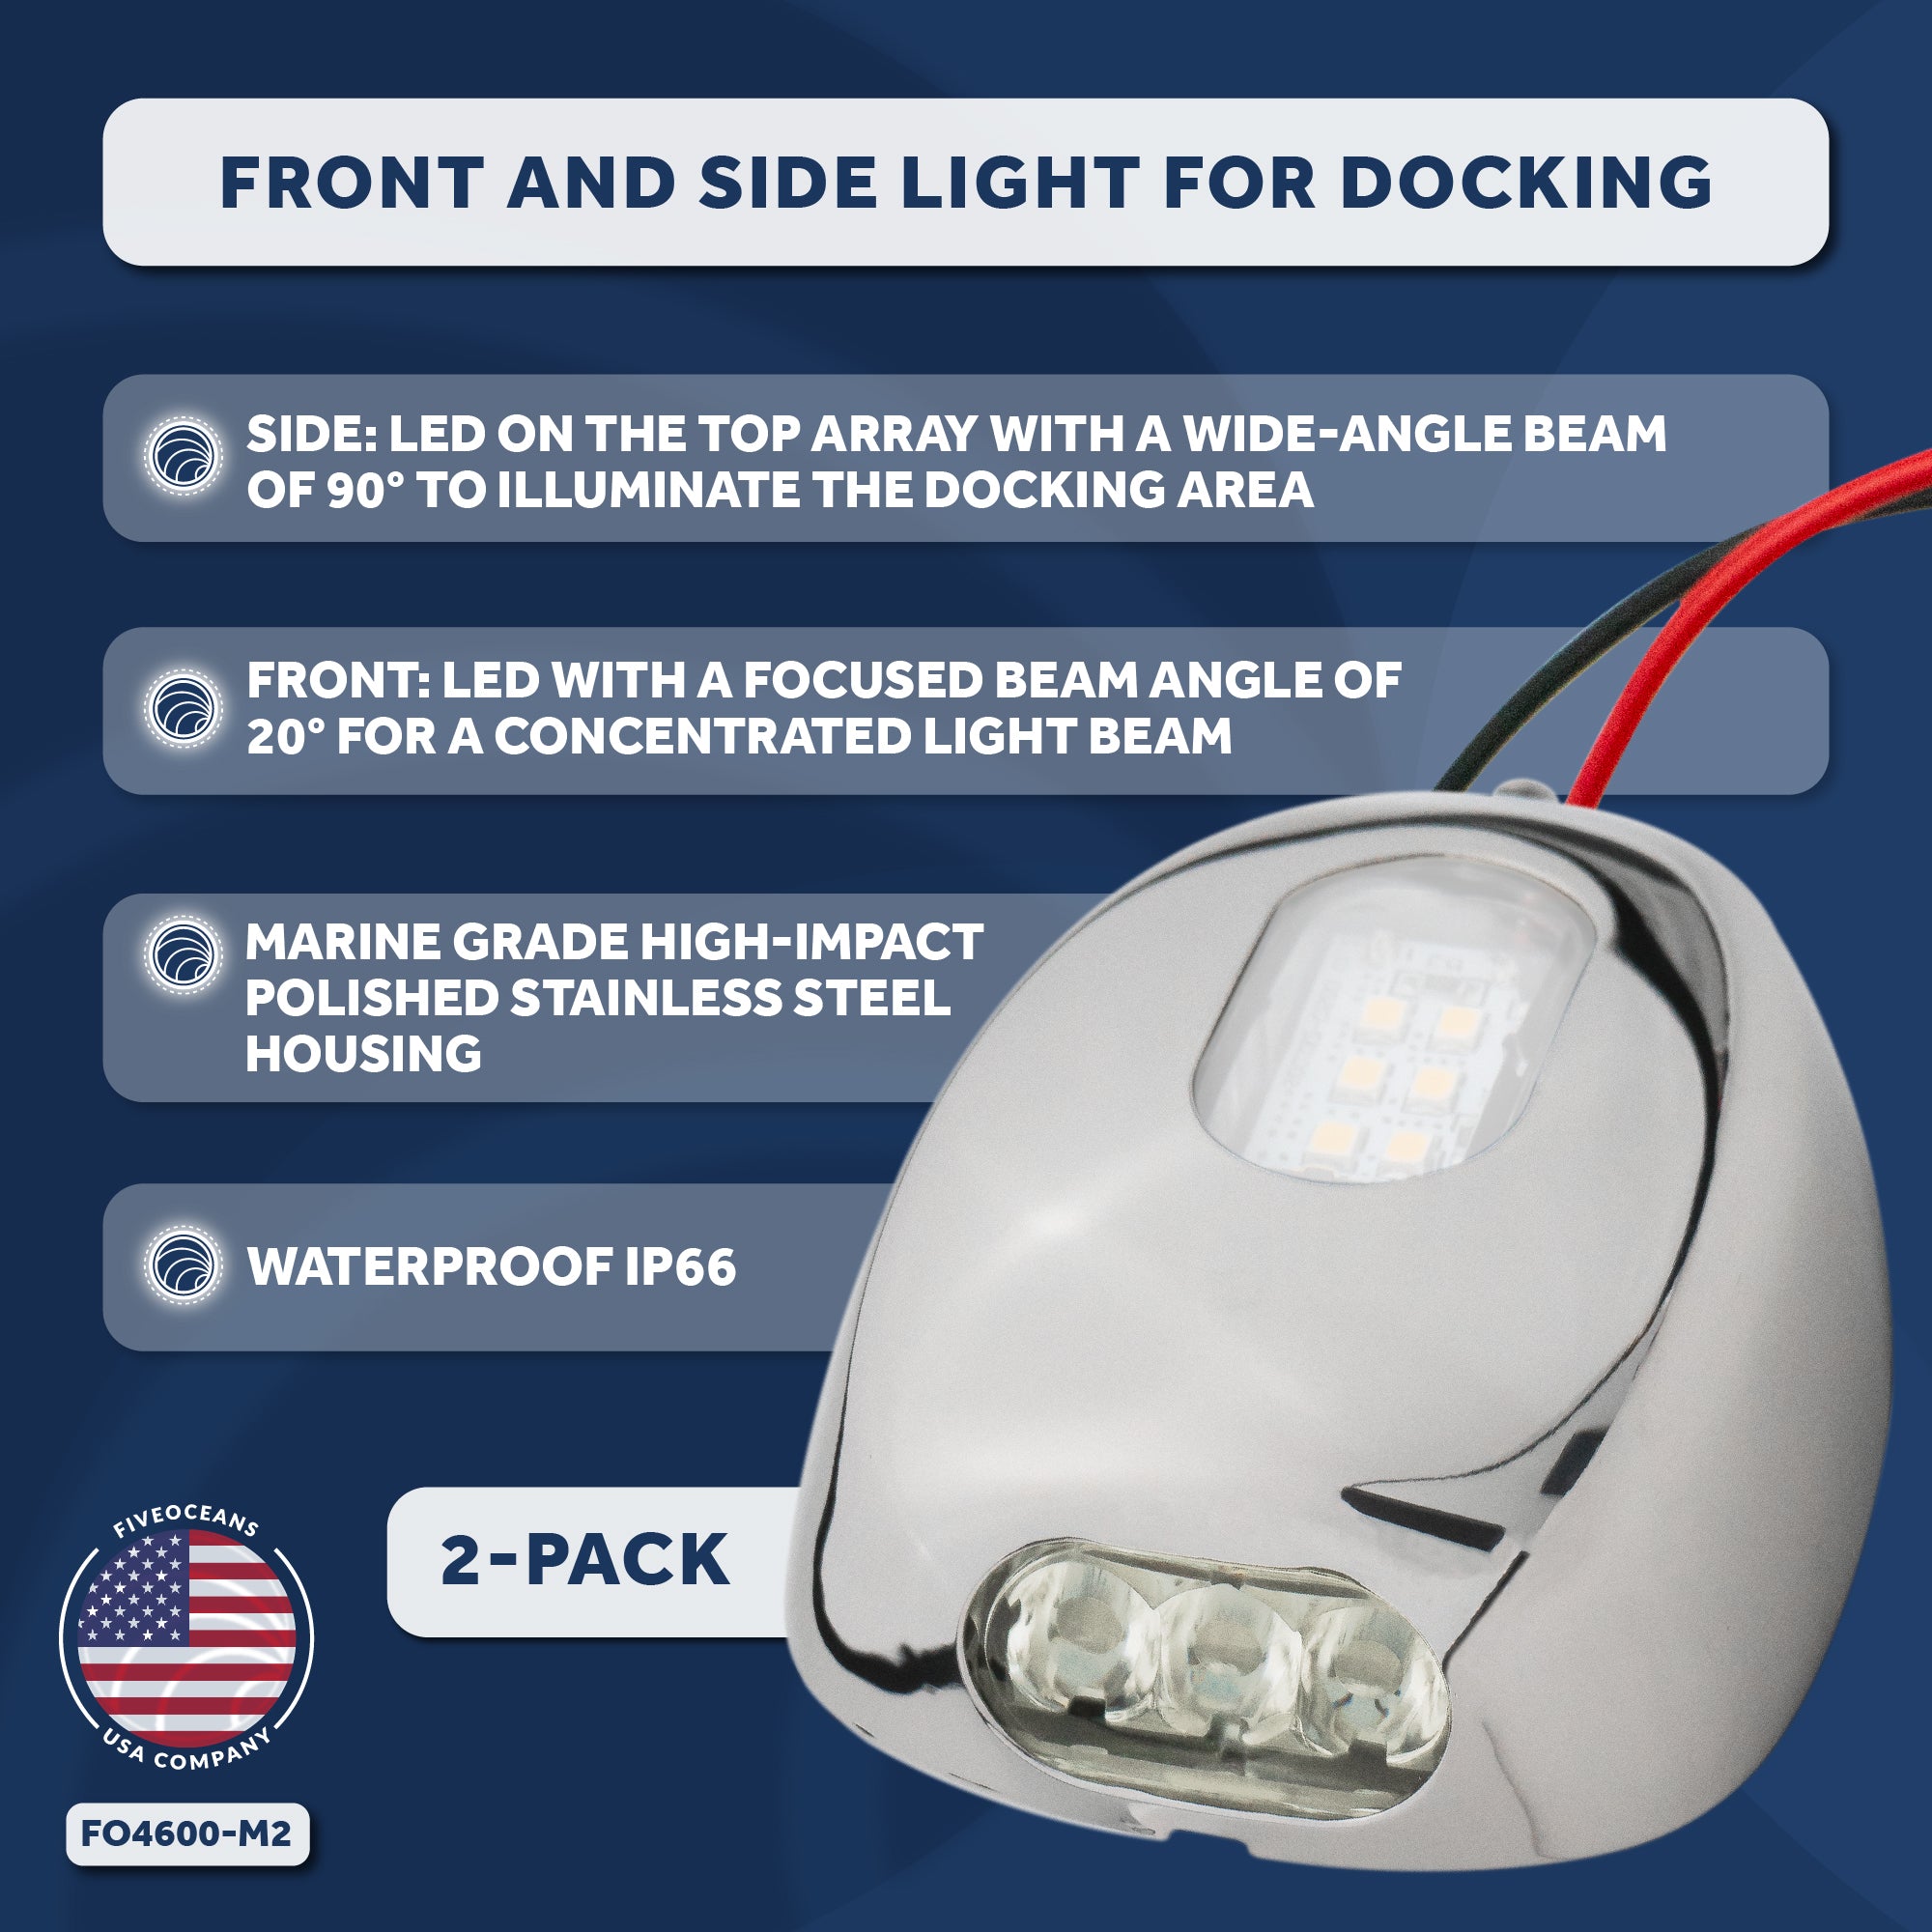 LED Front and Side Light for Docking, 2-Pack - FO4600-M2